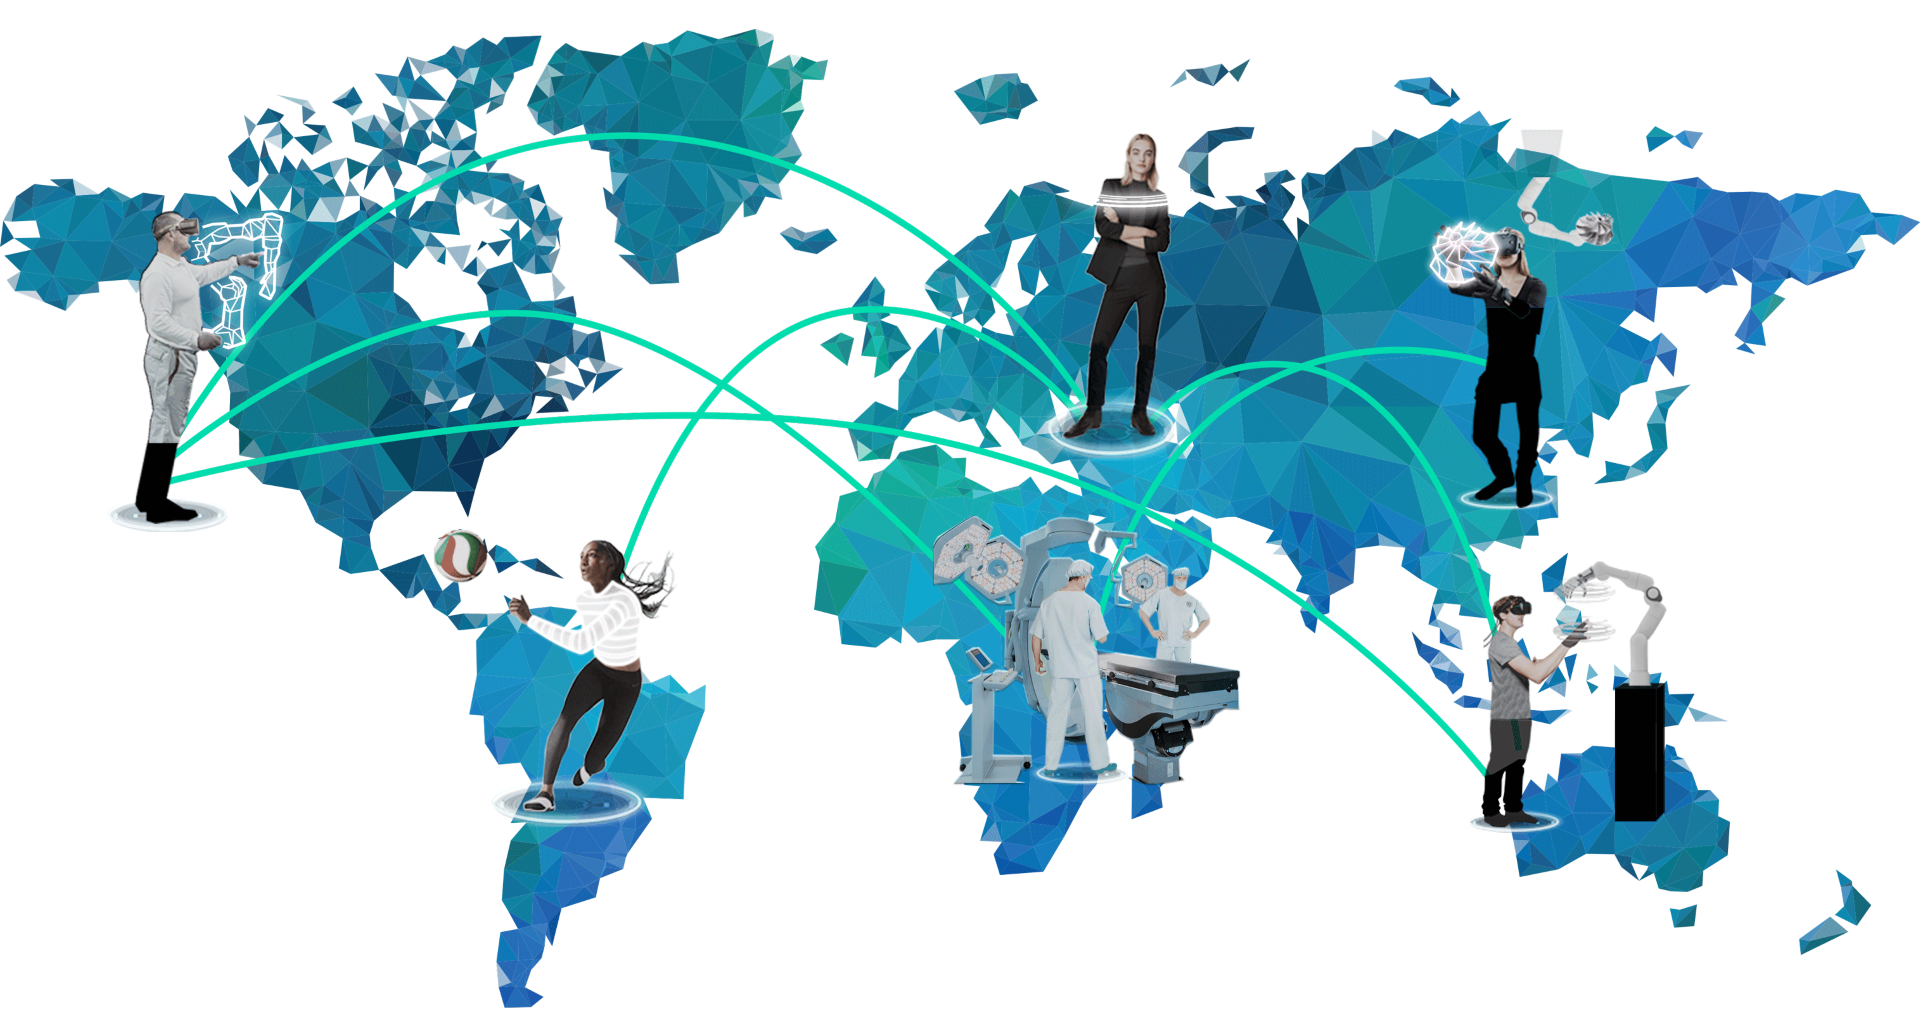 Worldmap with different people who are doing different activities being connected around the globe